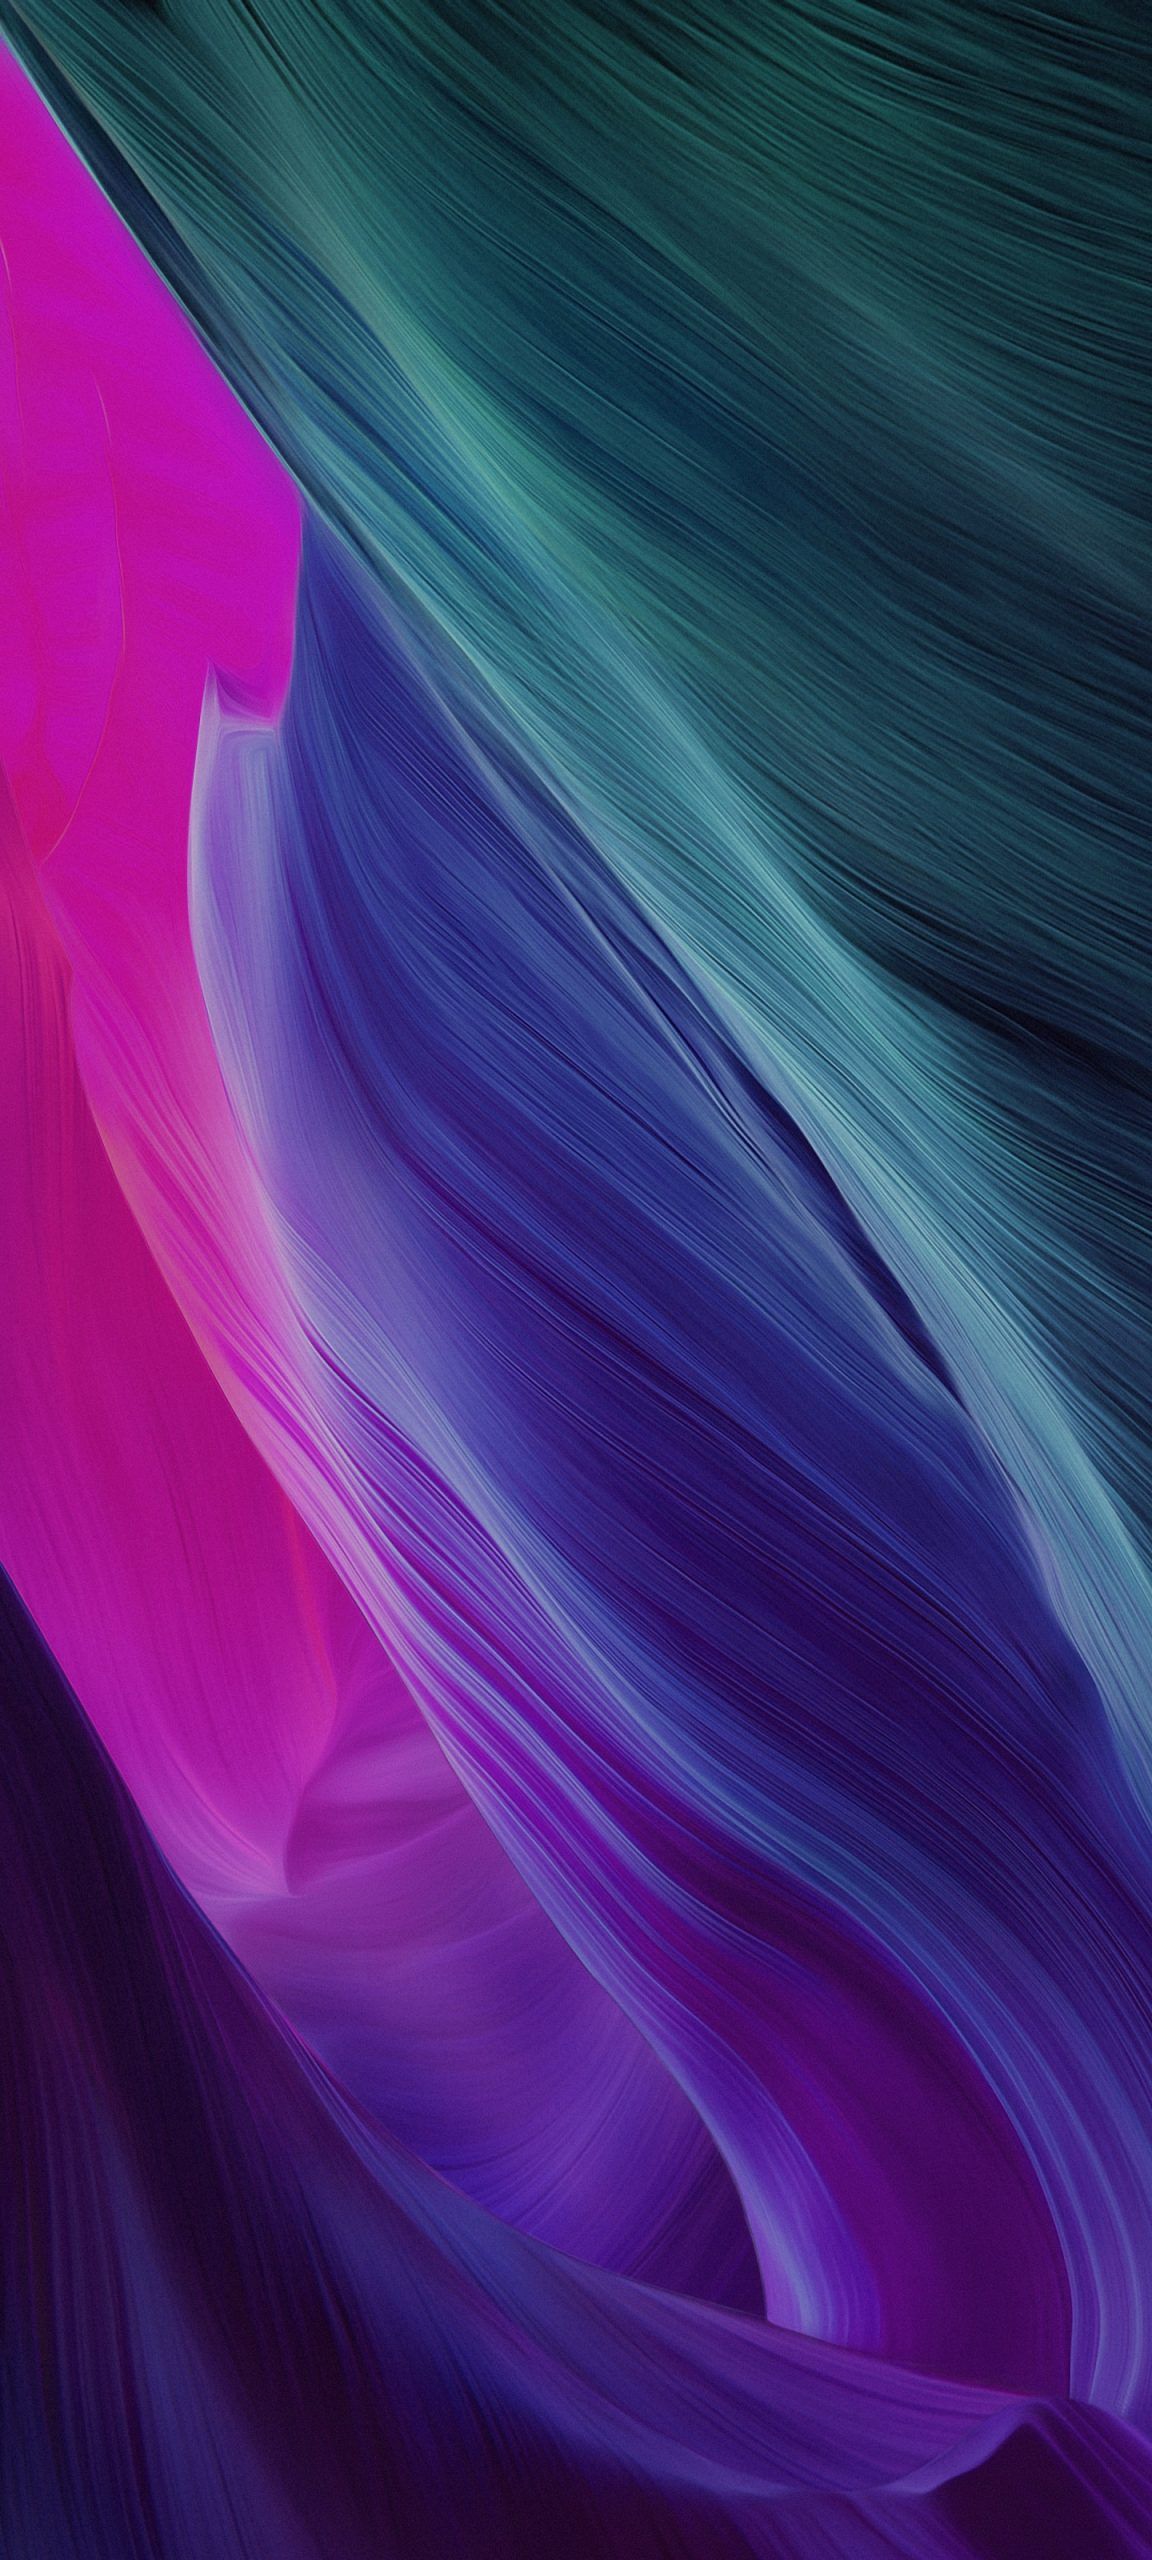 10 Wallpapers That Will Look Perfect on Your Samsung Galaxy S20 - #06 - Abstract 3D Motion in Blue Purple - HD Wallpapers Wallpapers Download High Resolution Wallpapers